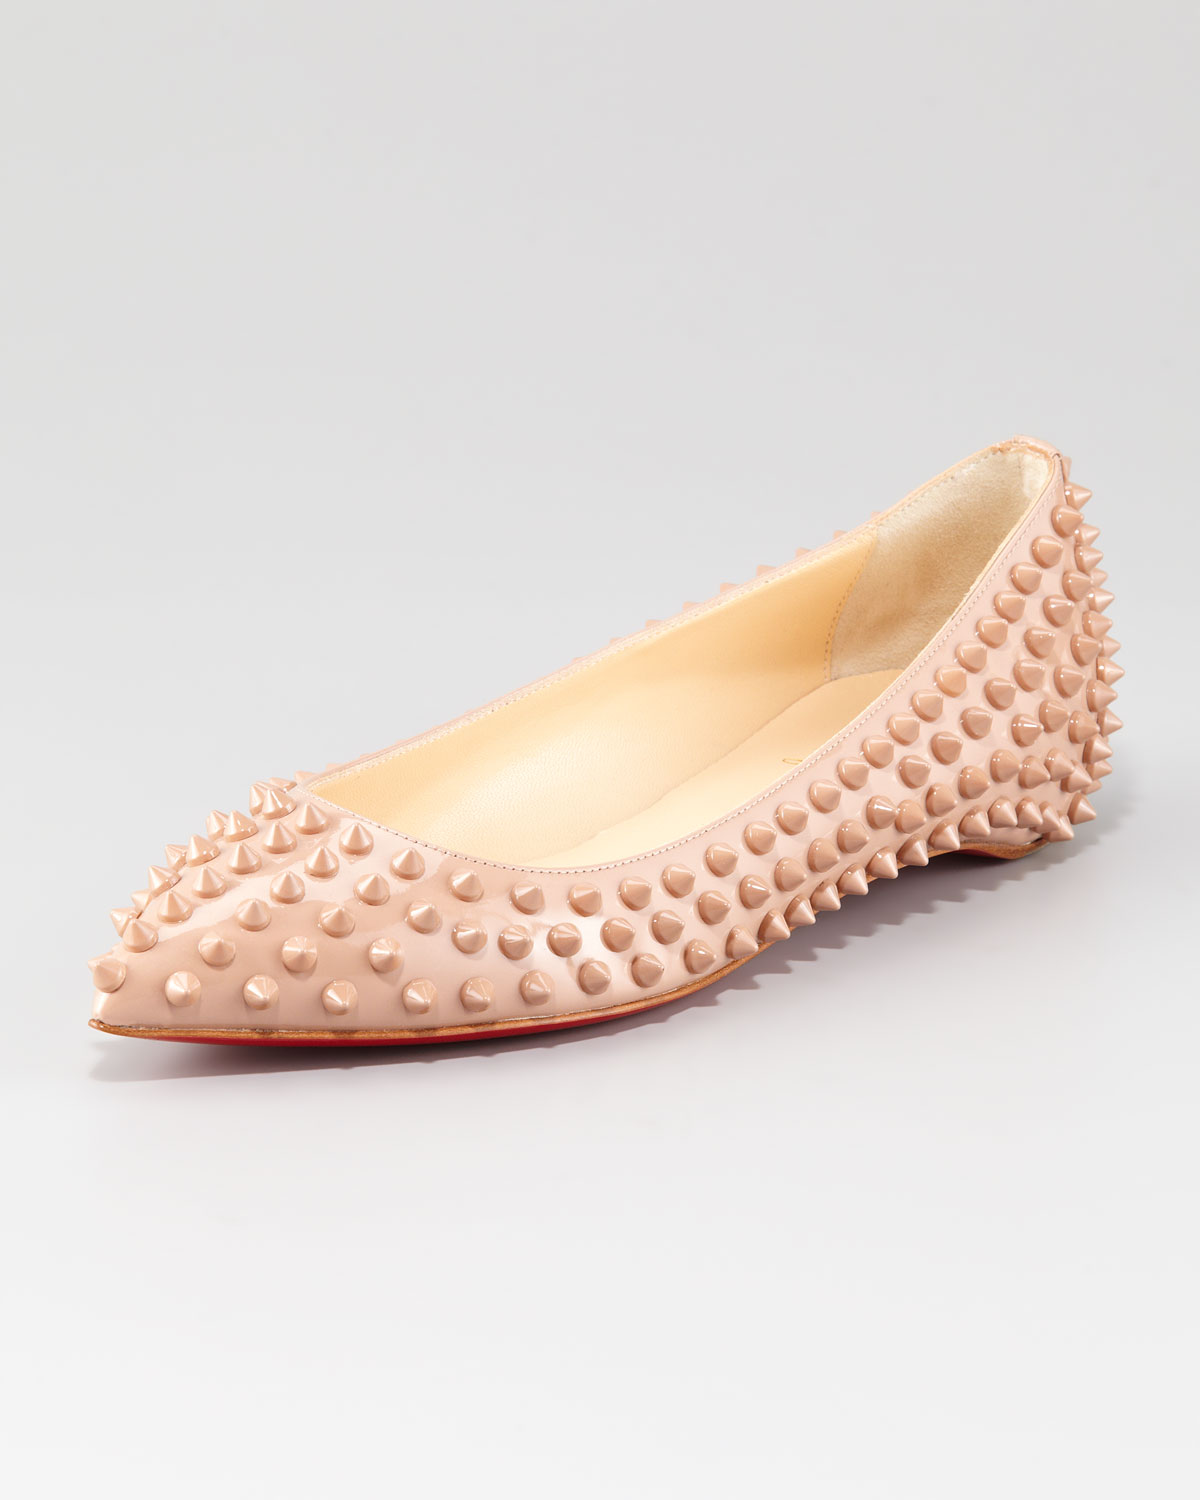 spiked flats shoes